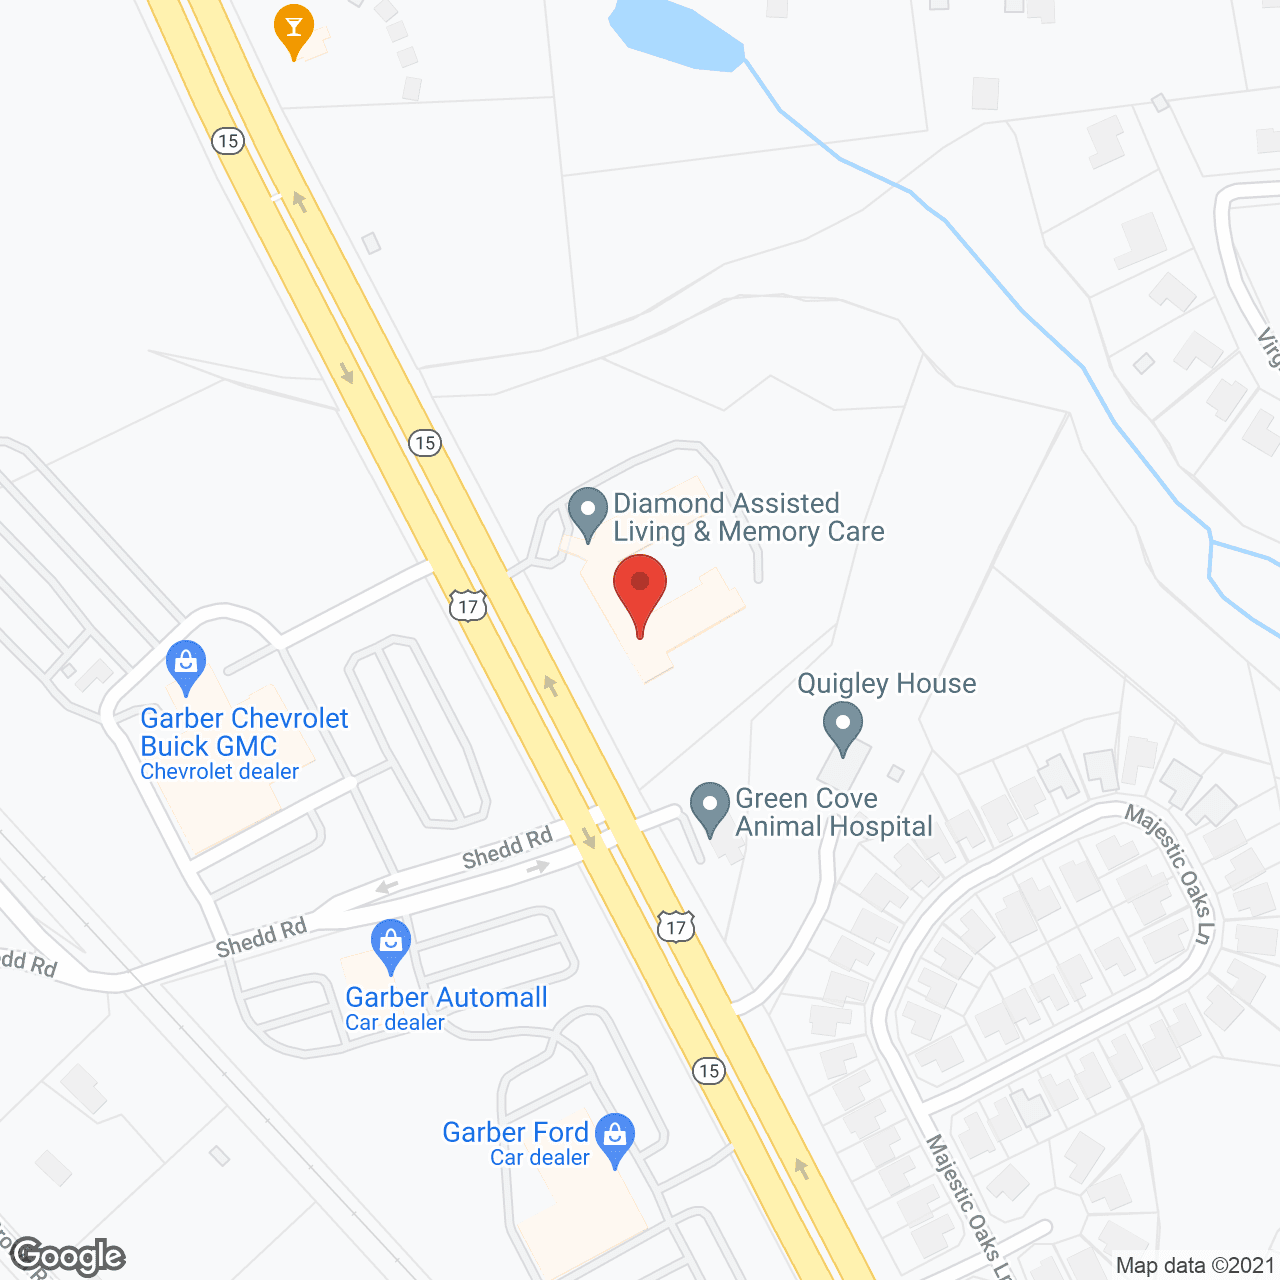 Diamond Assisted Living and Memory Care in google map